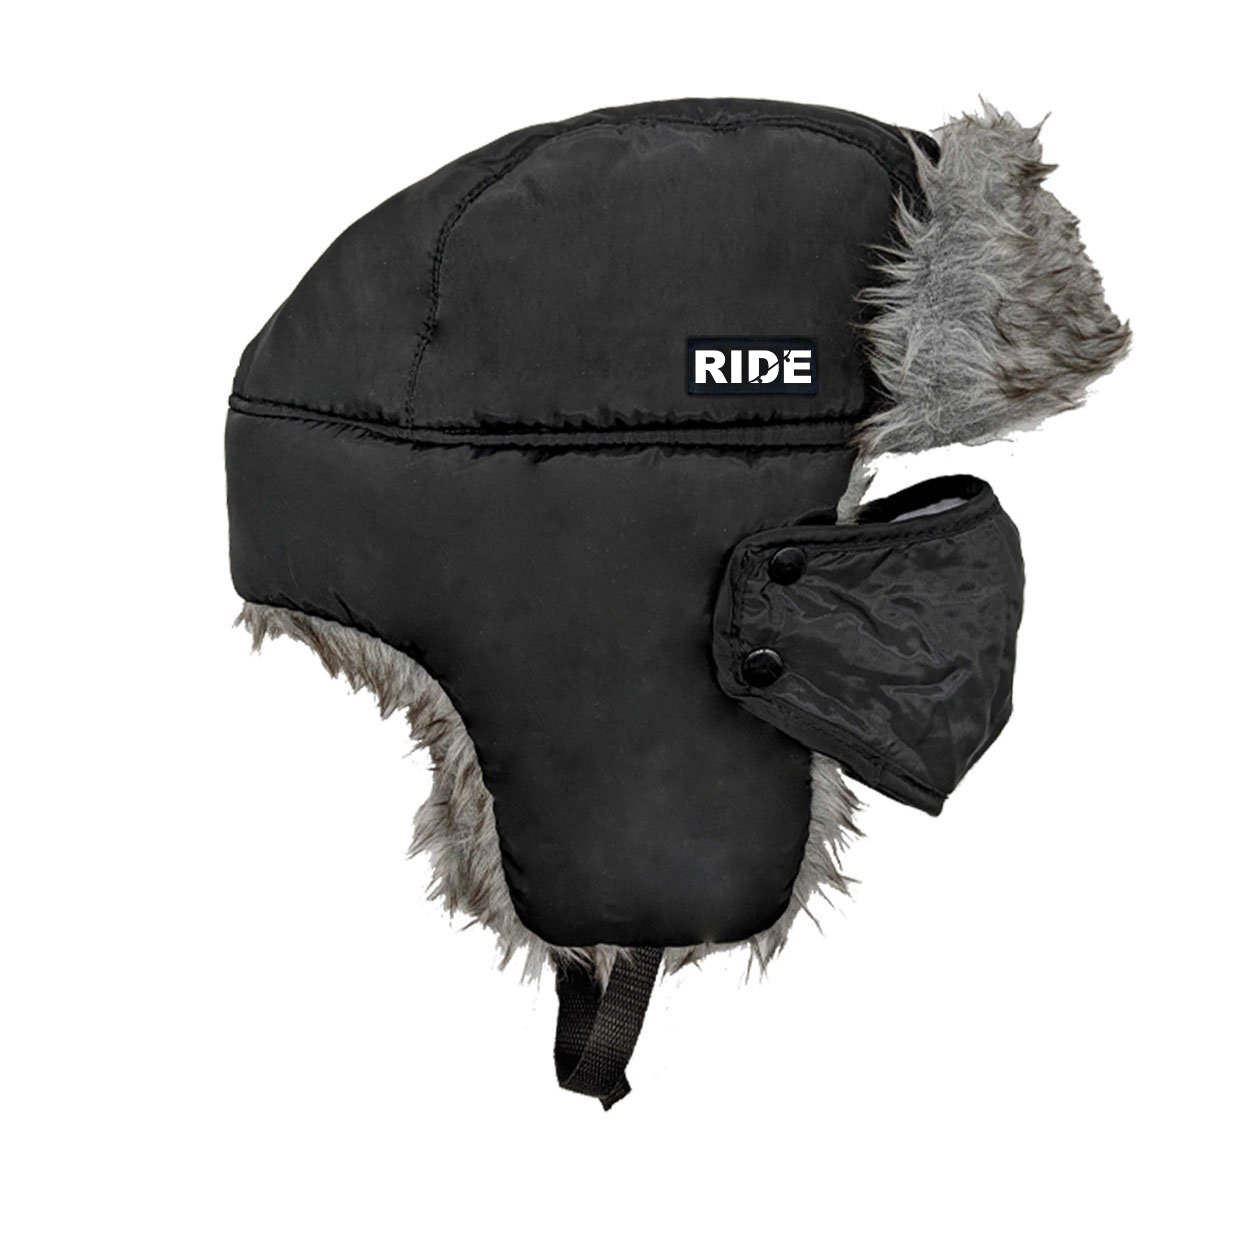 Ride Skateboard Logo Night Out Woven Patch Full Face Windproof Bomber Hat Black (White Logo)